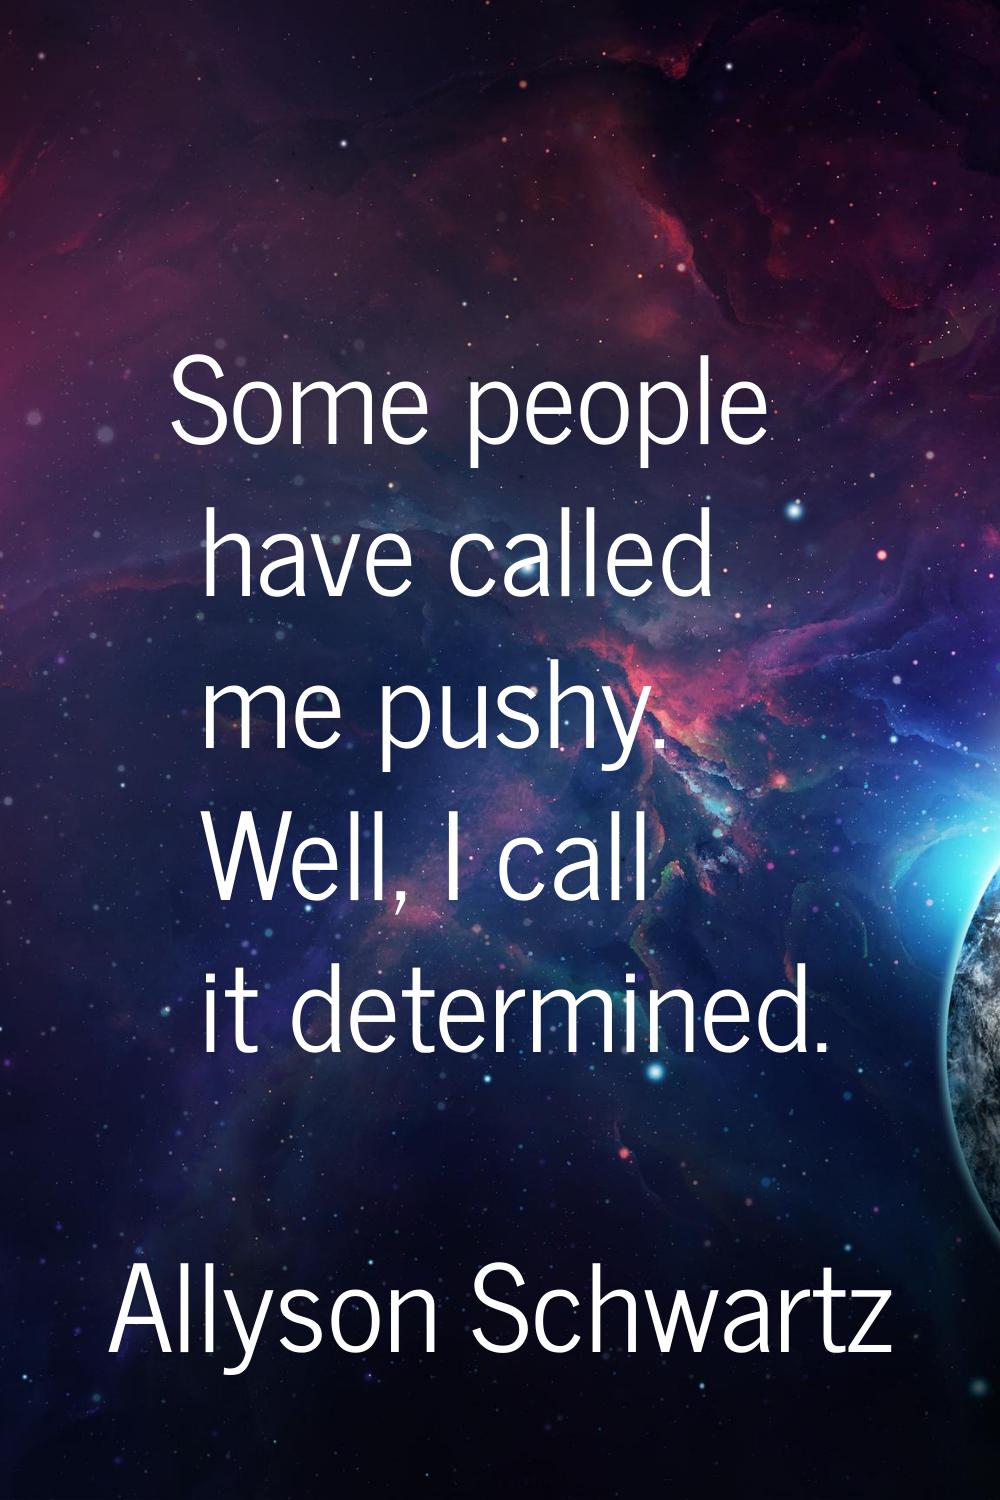 Some people have called me pushy. Well, I call it determined.